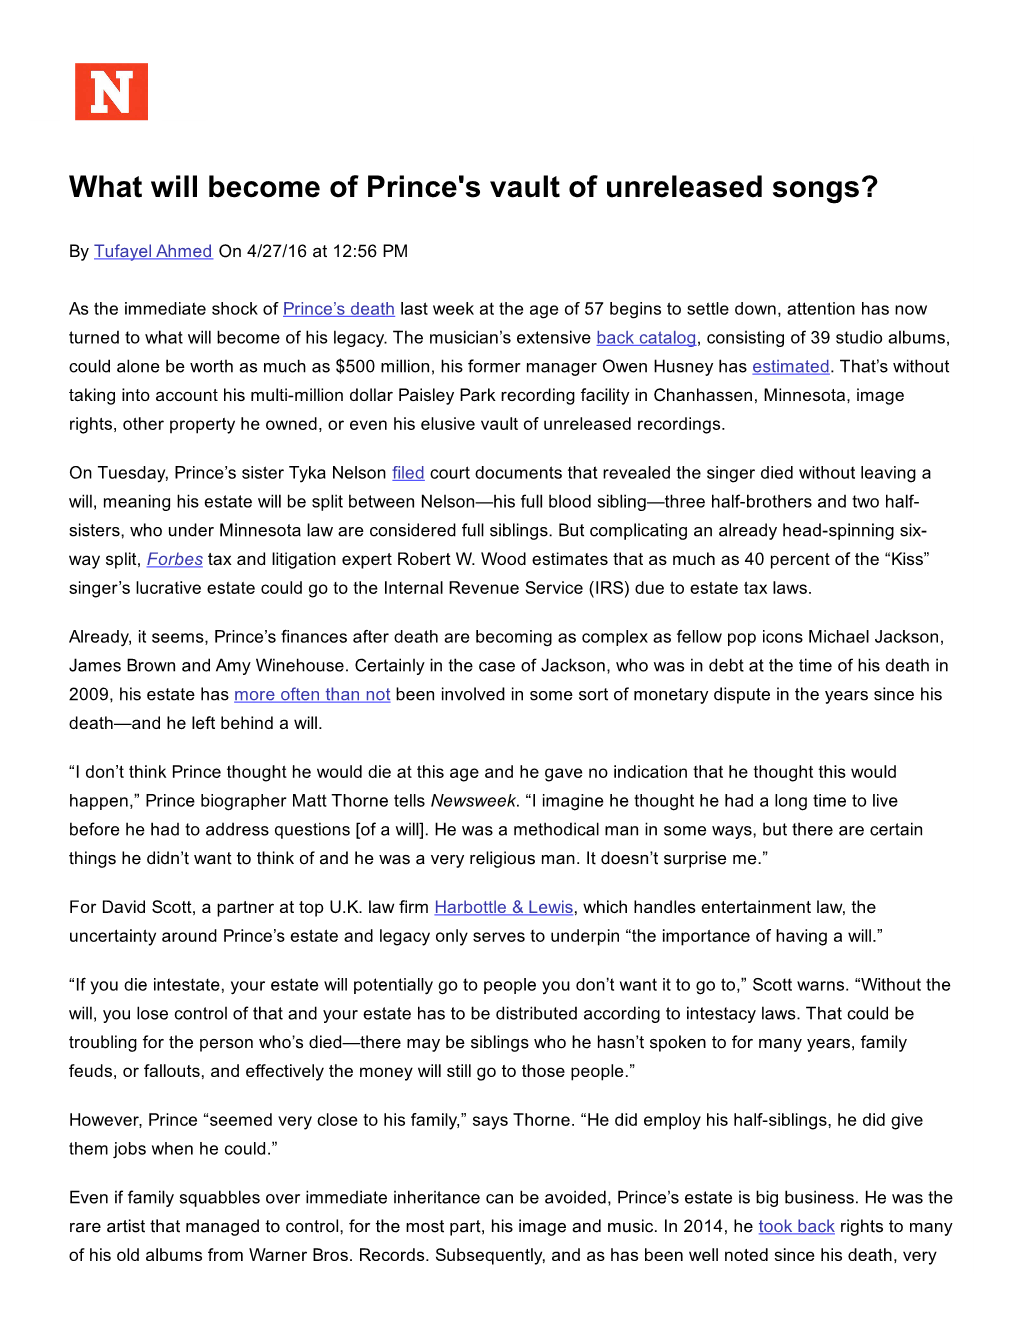 What Will Become of Prince's Vault of Unreleased Songs?